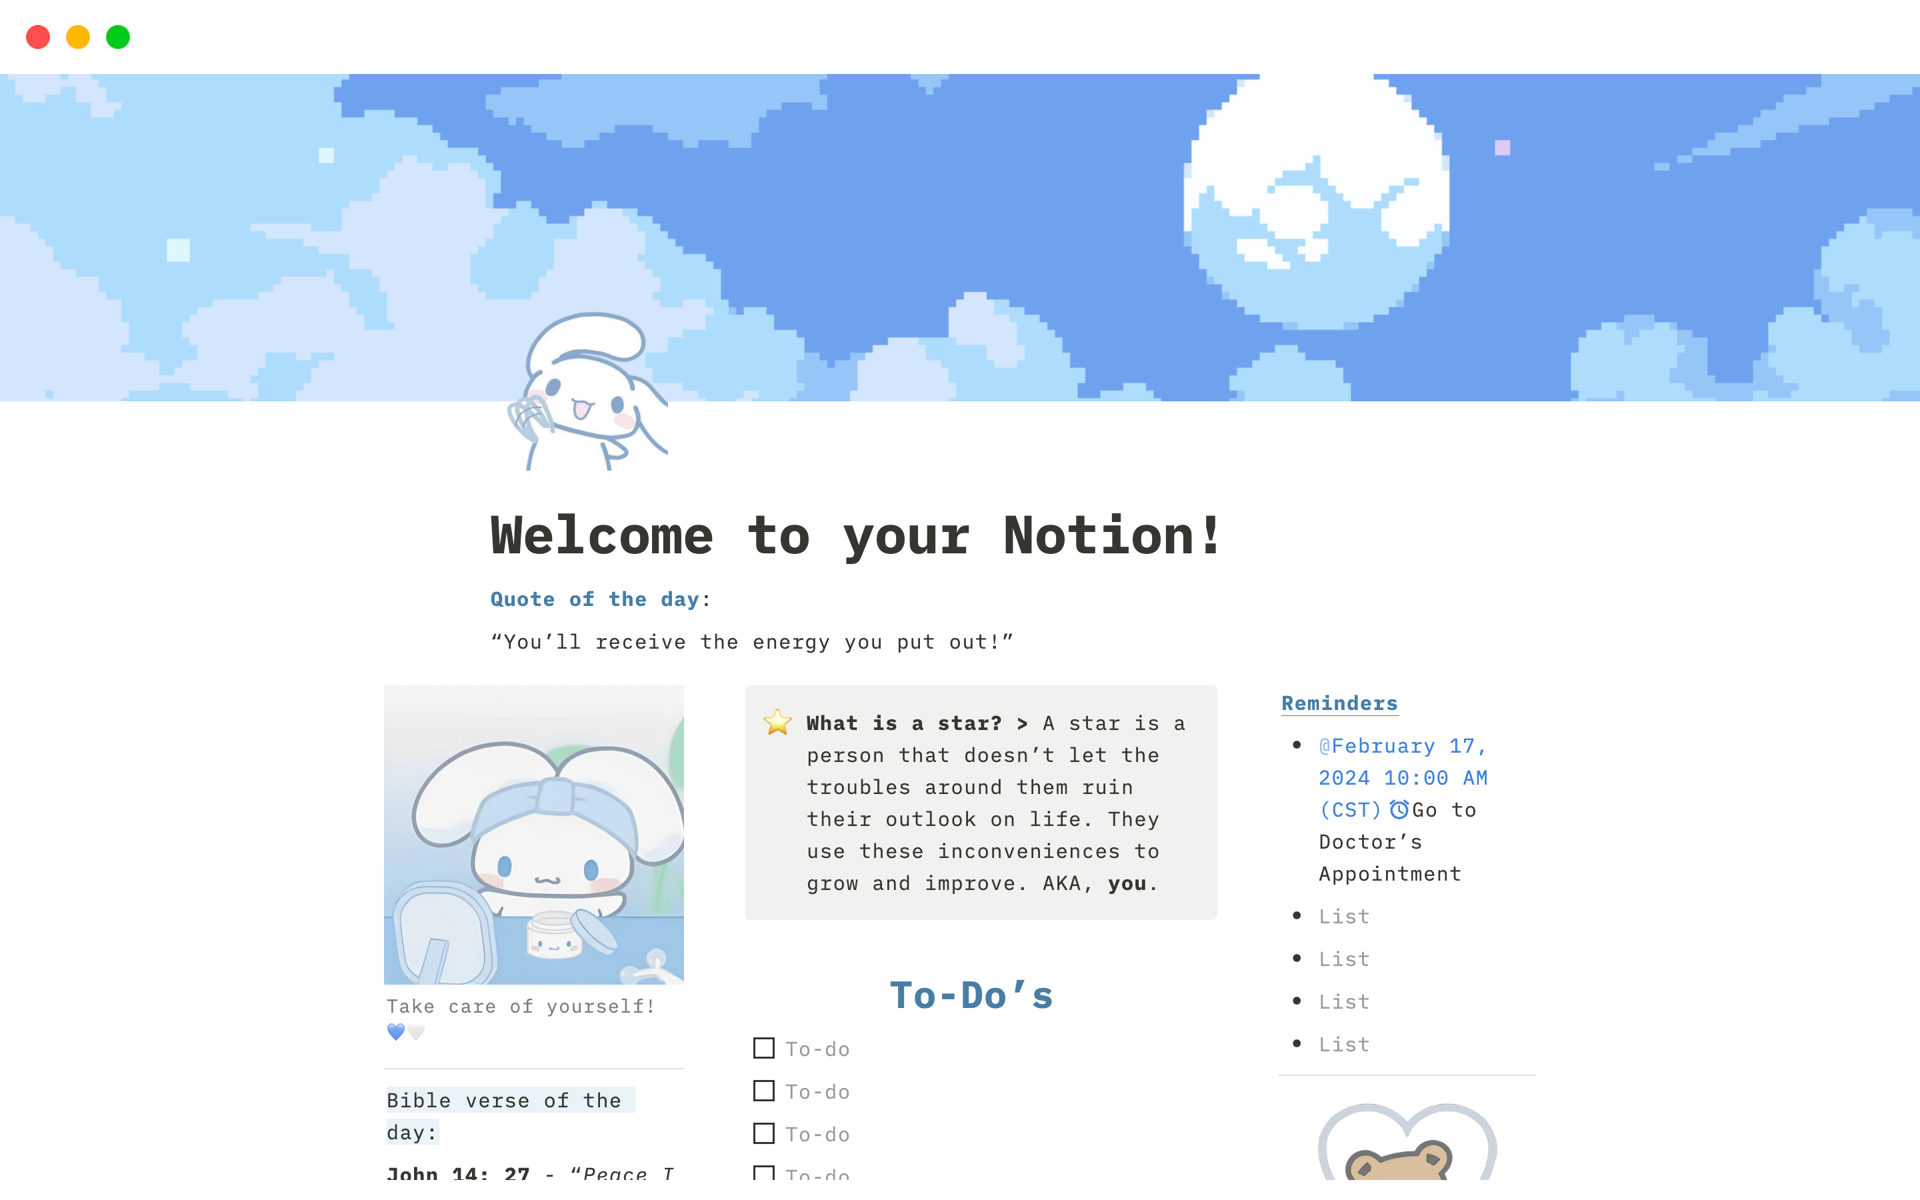 This is a Cinnamaroll-inspired template with a quote, reminder, to-do list, and Bible verse section. It has a blue theme, but you can customize it in any way you want!